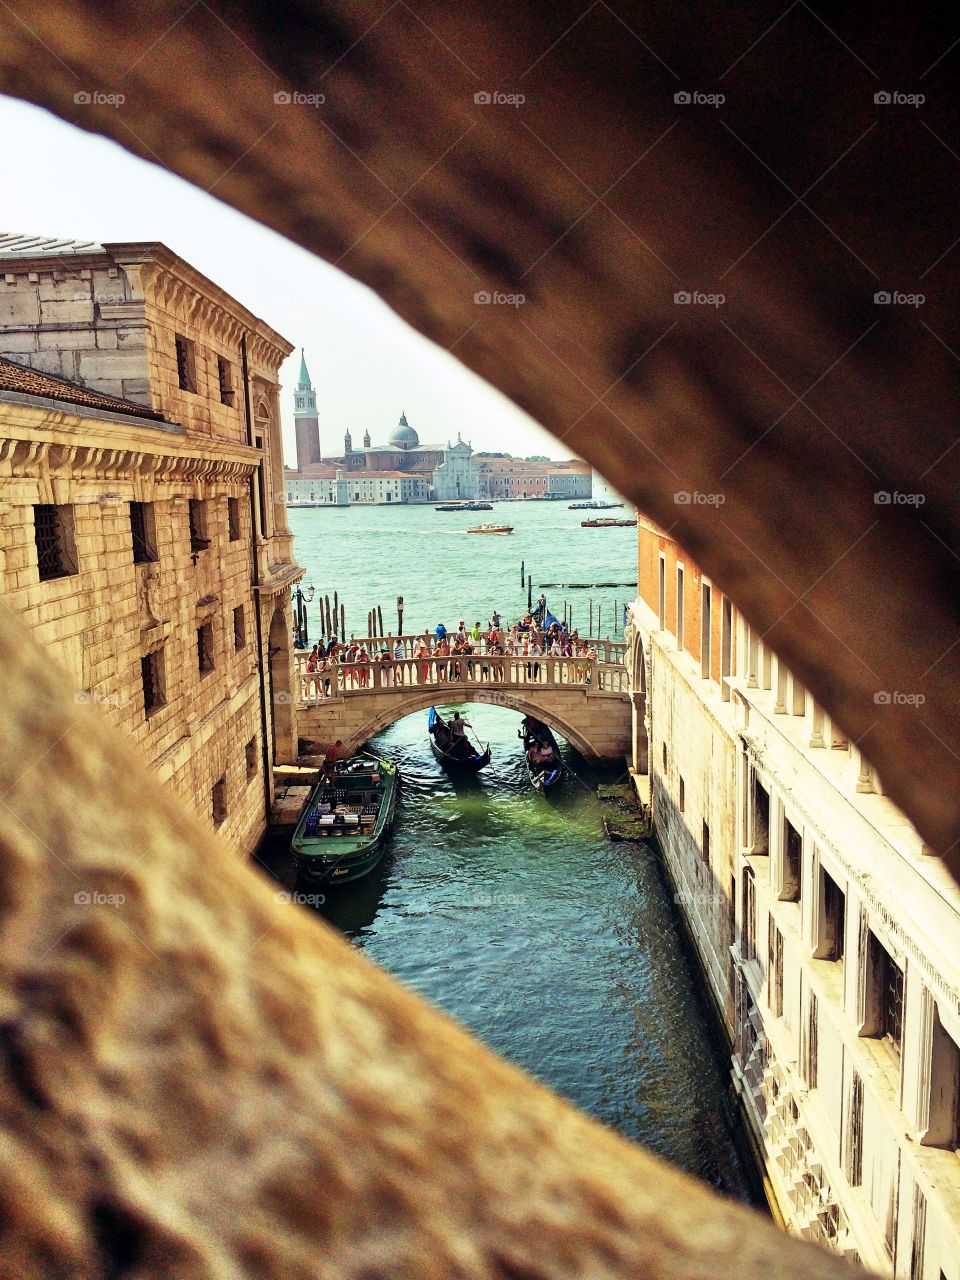 A peak of Venice, Italy . View of the canal from Venice's infamous prison.